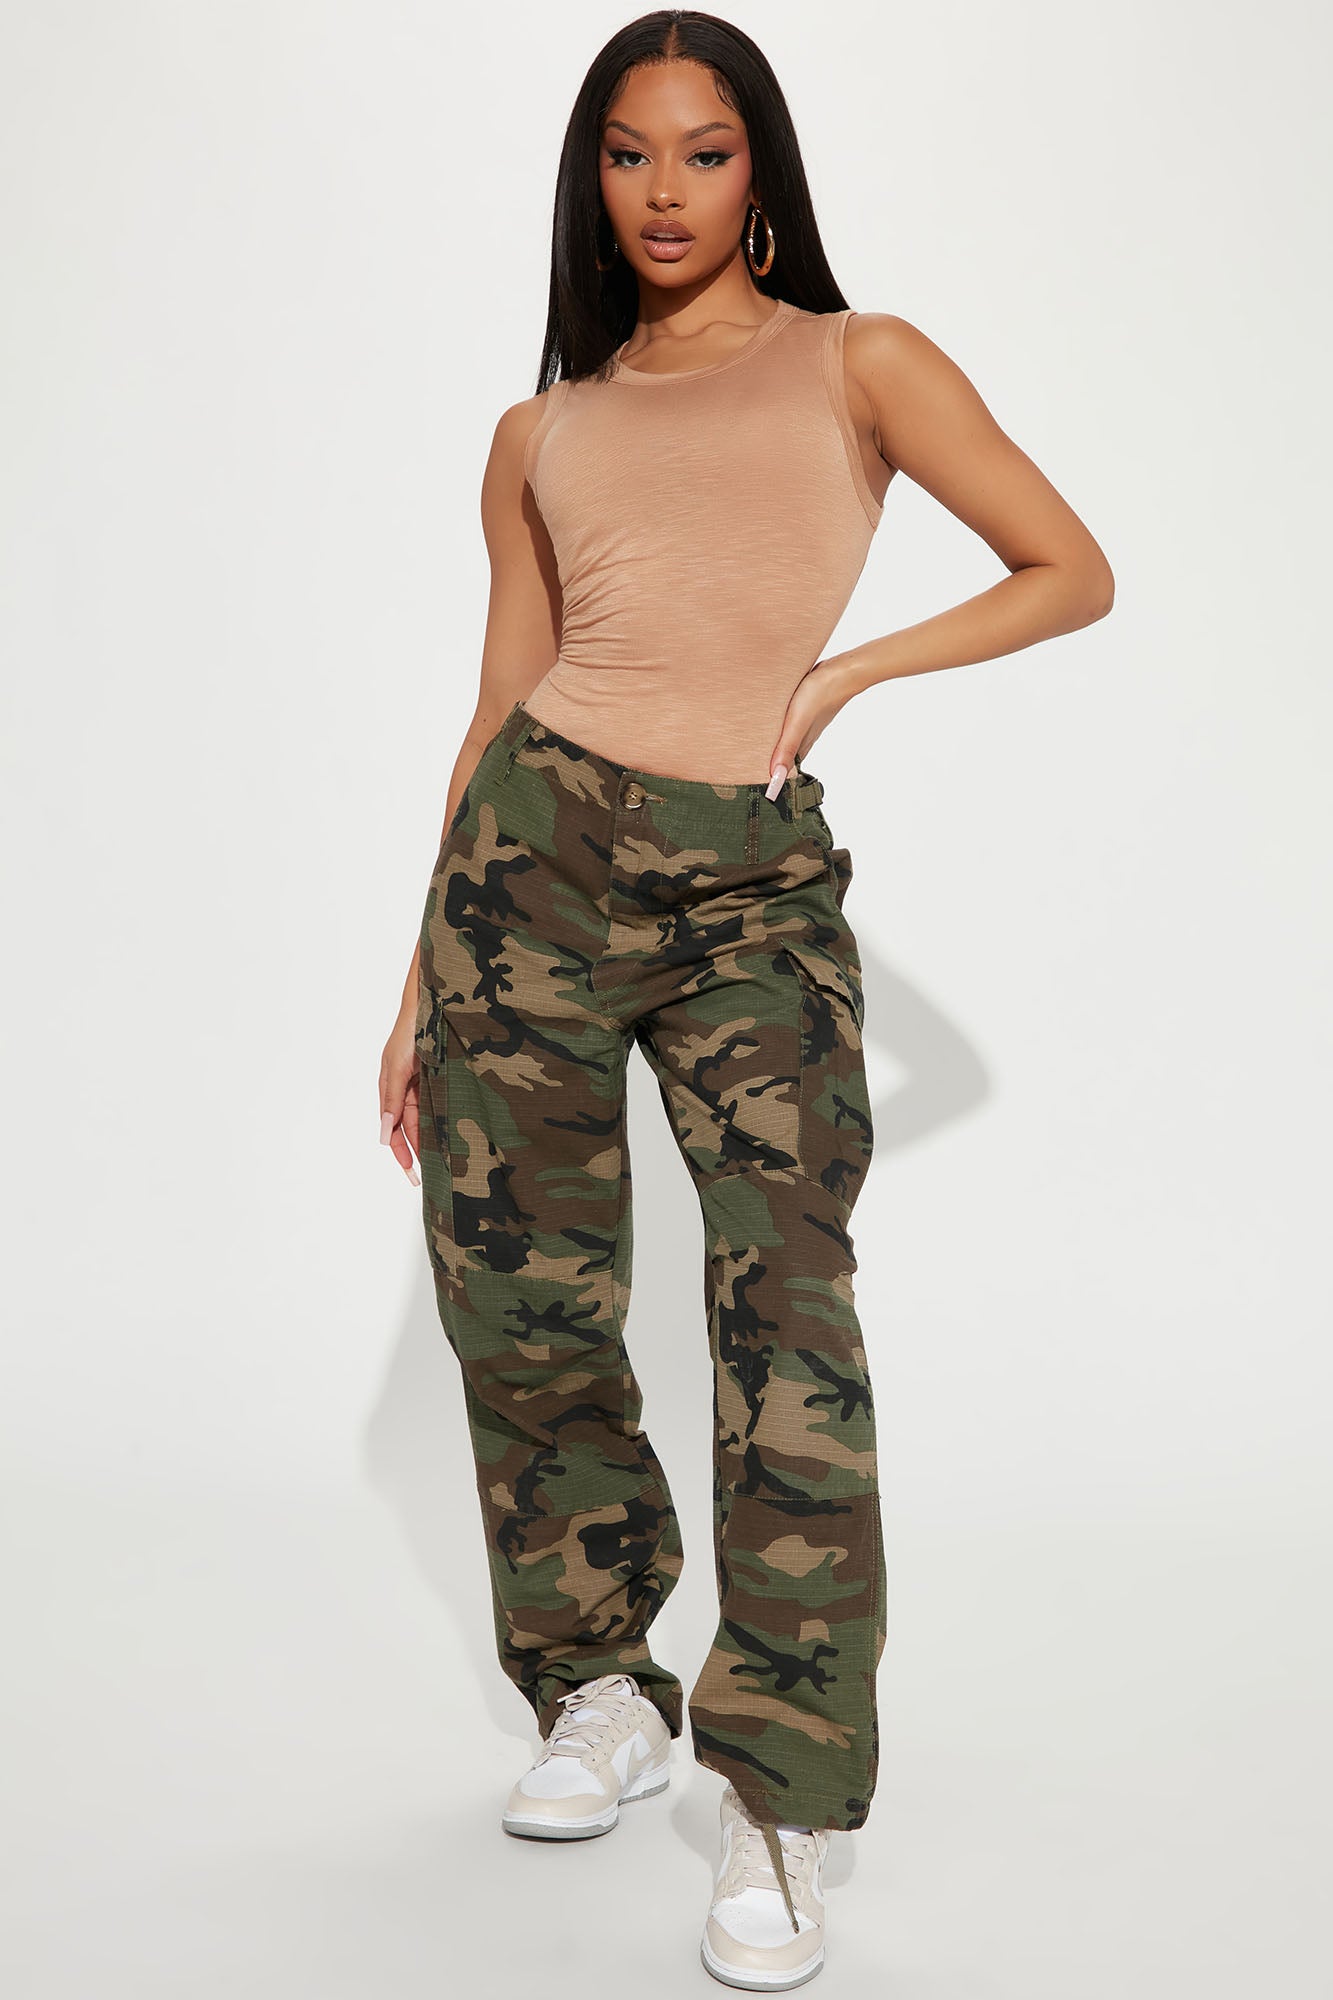 Circle The Drain Camouflage Pant - Camouflage